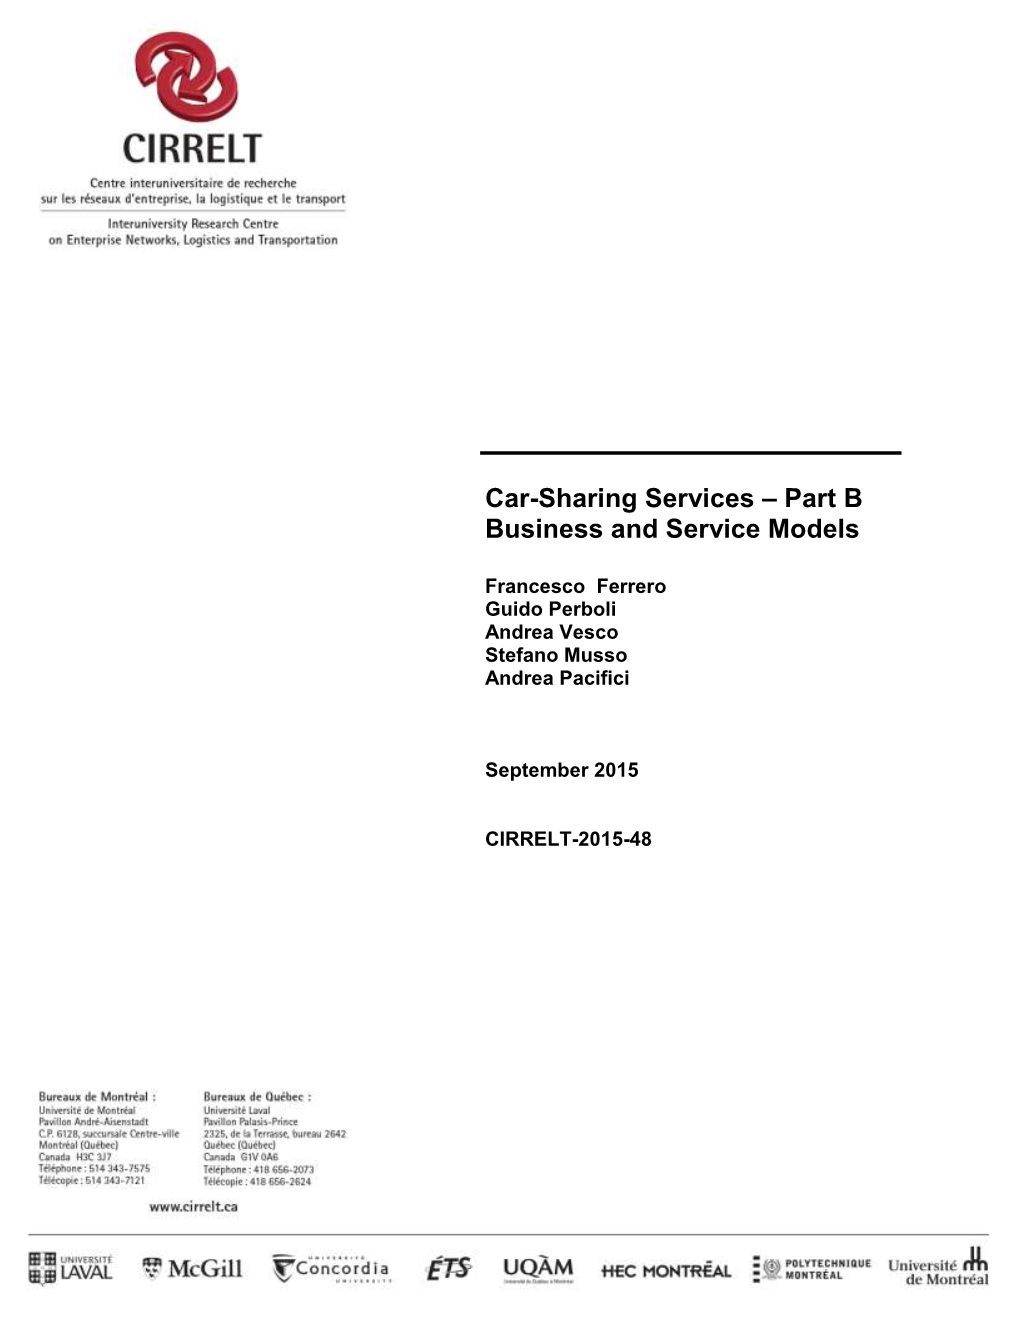 Car-Sharing Services – Part B Business and Service Models